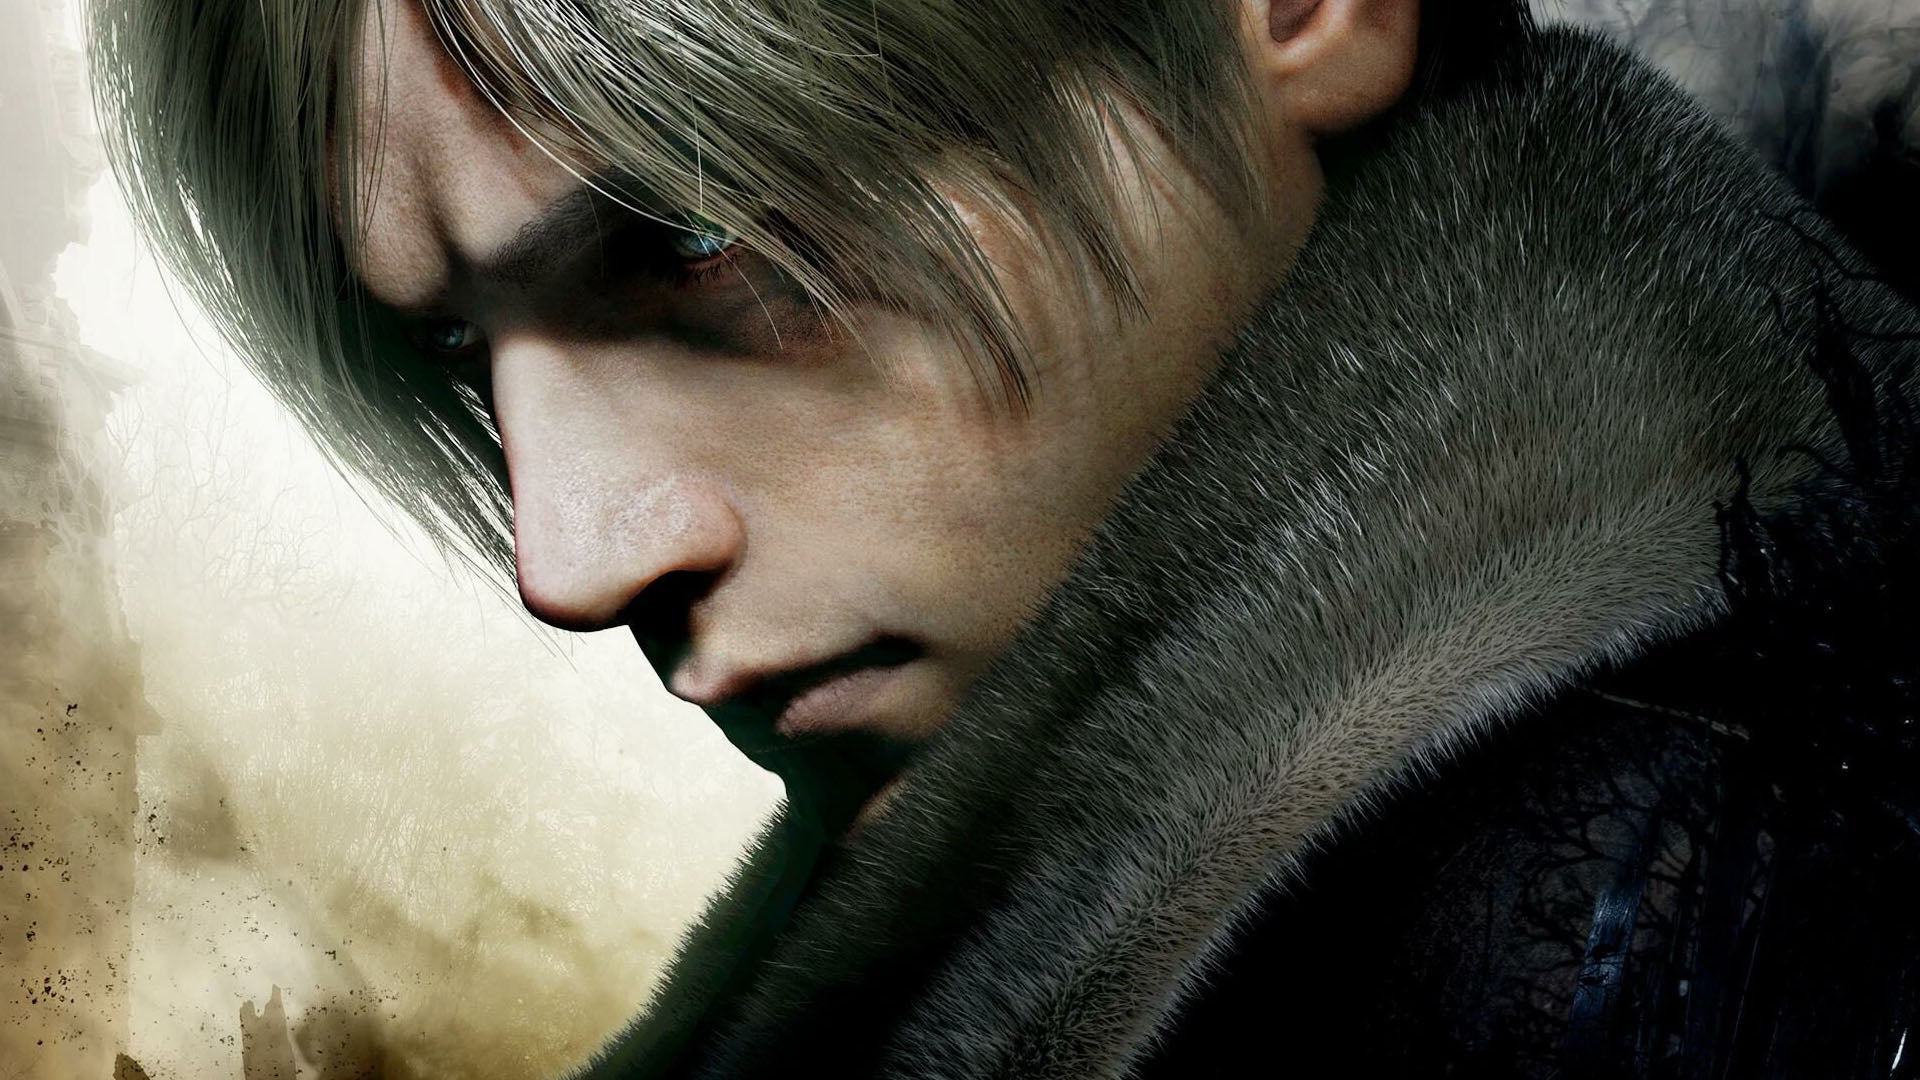 Image for The Resident Evil 4 remake remains a legendary experience